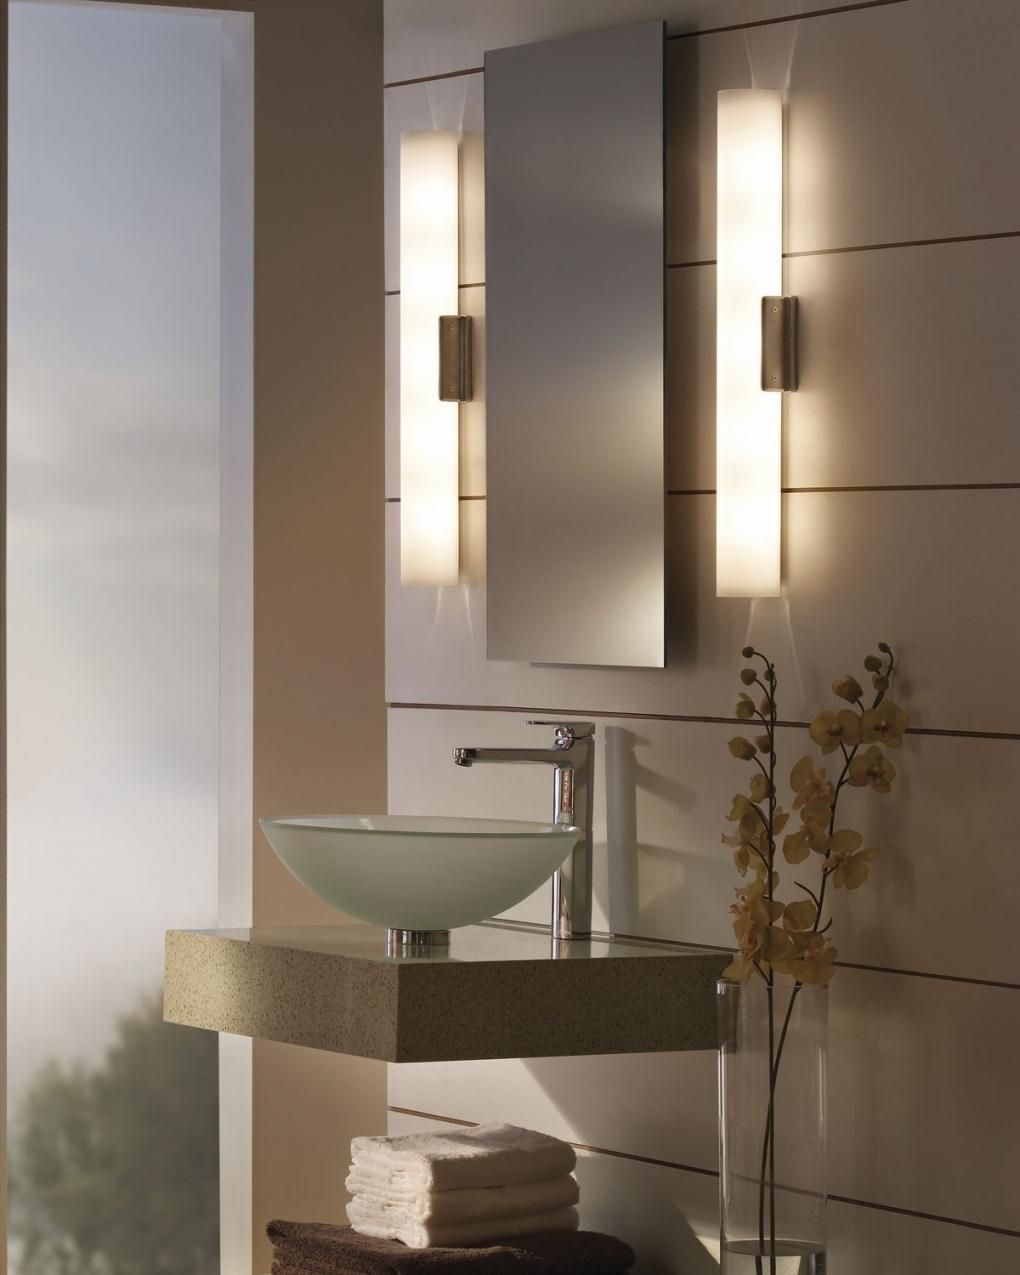 Collection In Bathroom Mirror Lighting Ideas With Bathroom Pertaining To Bathroom Lighting And Mirrors (Photo 13 of 20)